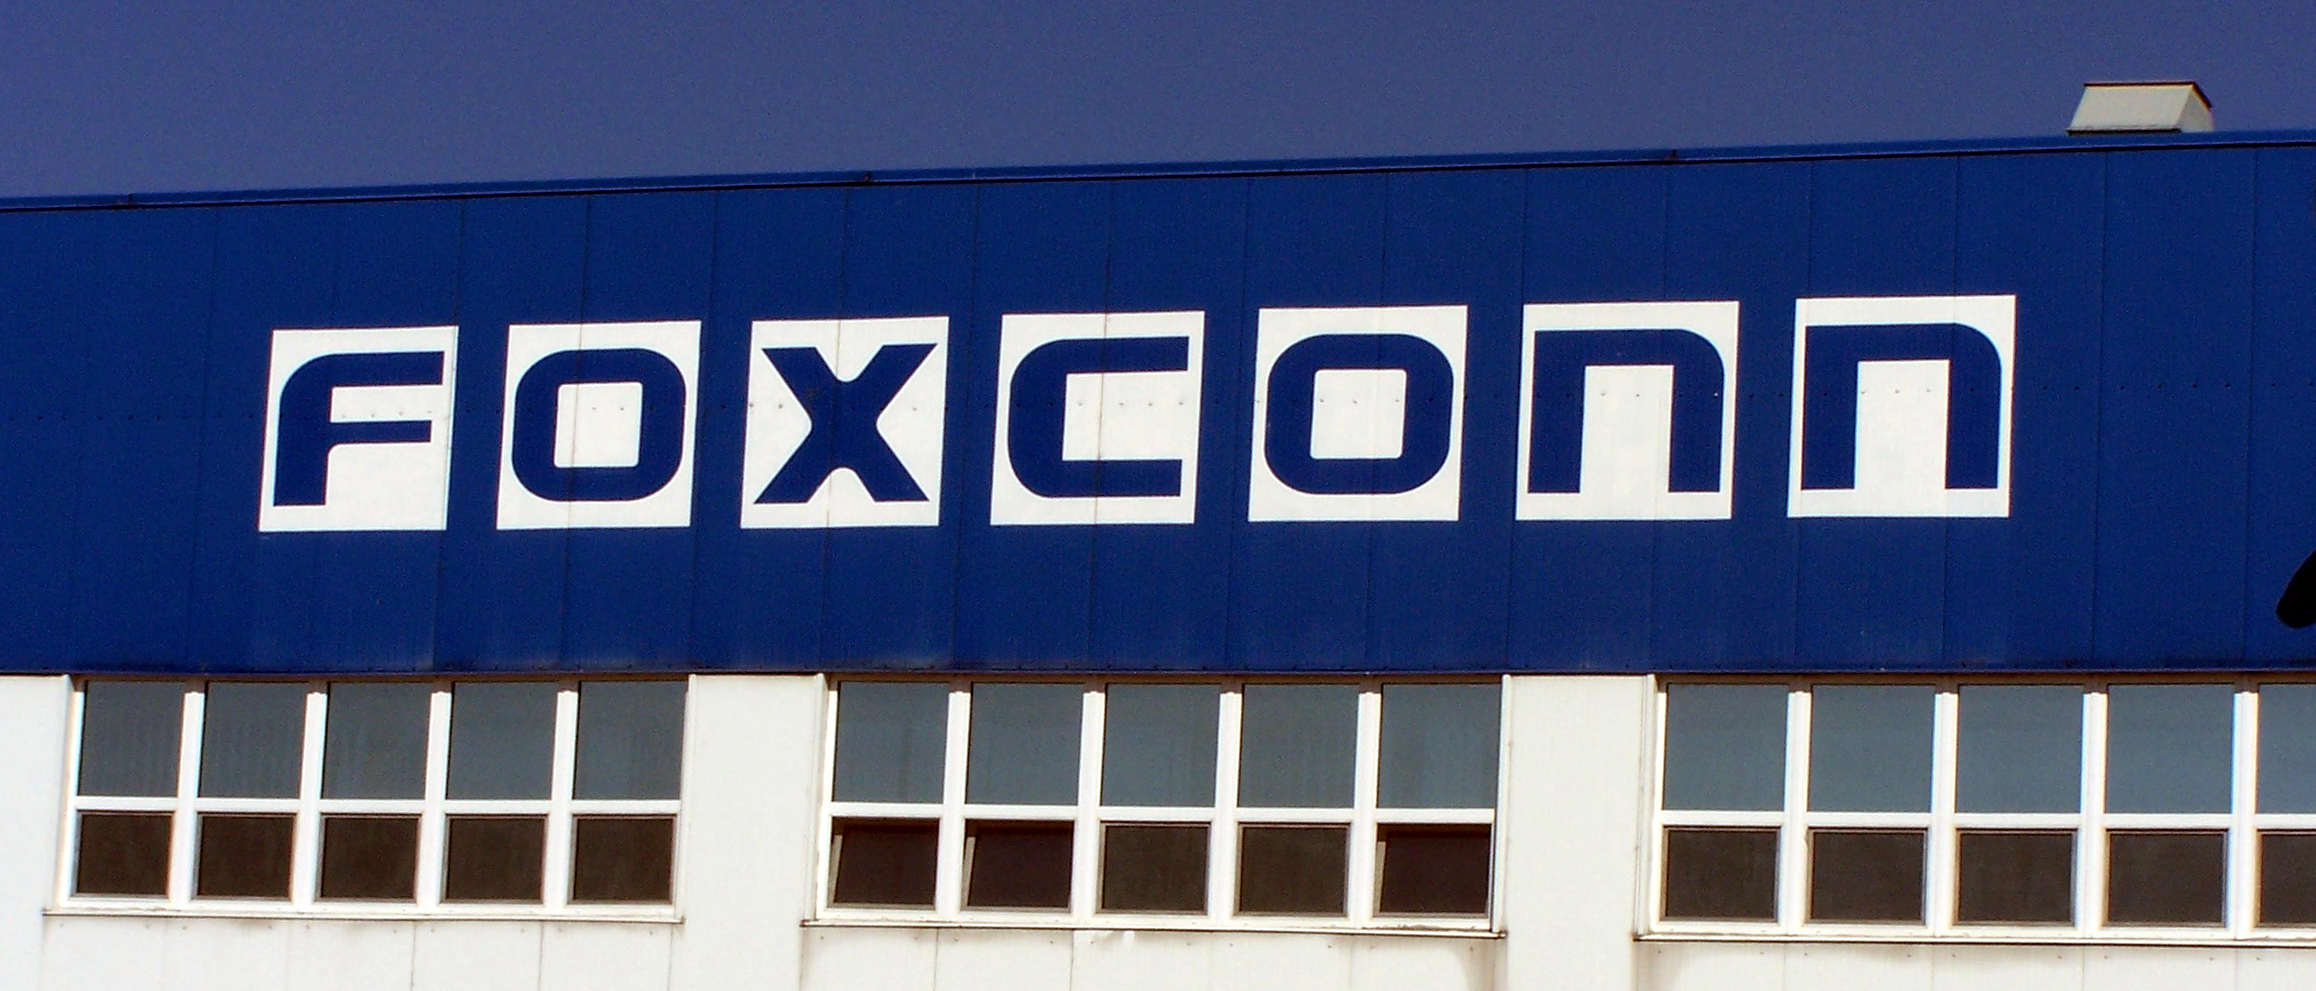 Great Lakes Water Withdrawals: What's happening in Wisconsin with Foxconn? - Great Lakes Now